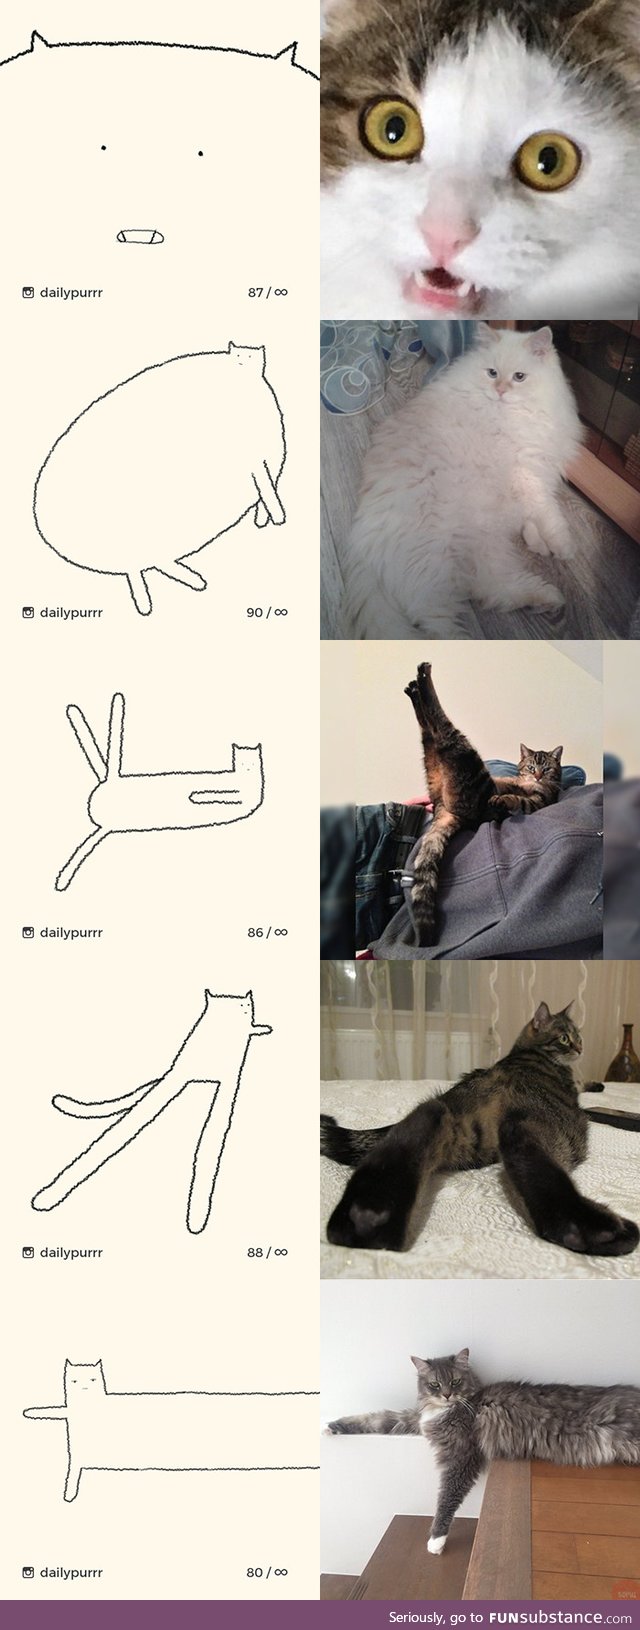 Drawings of cats